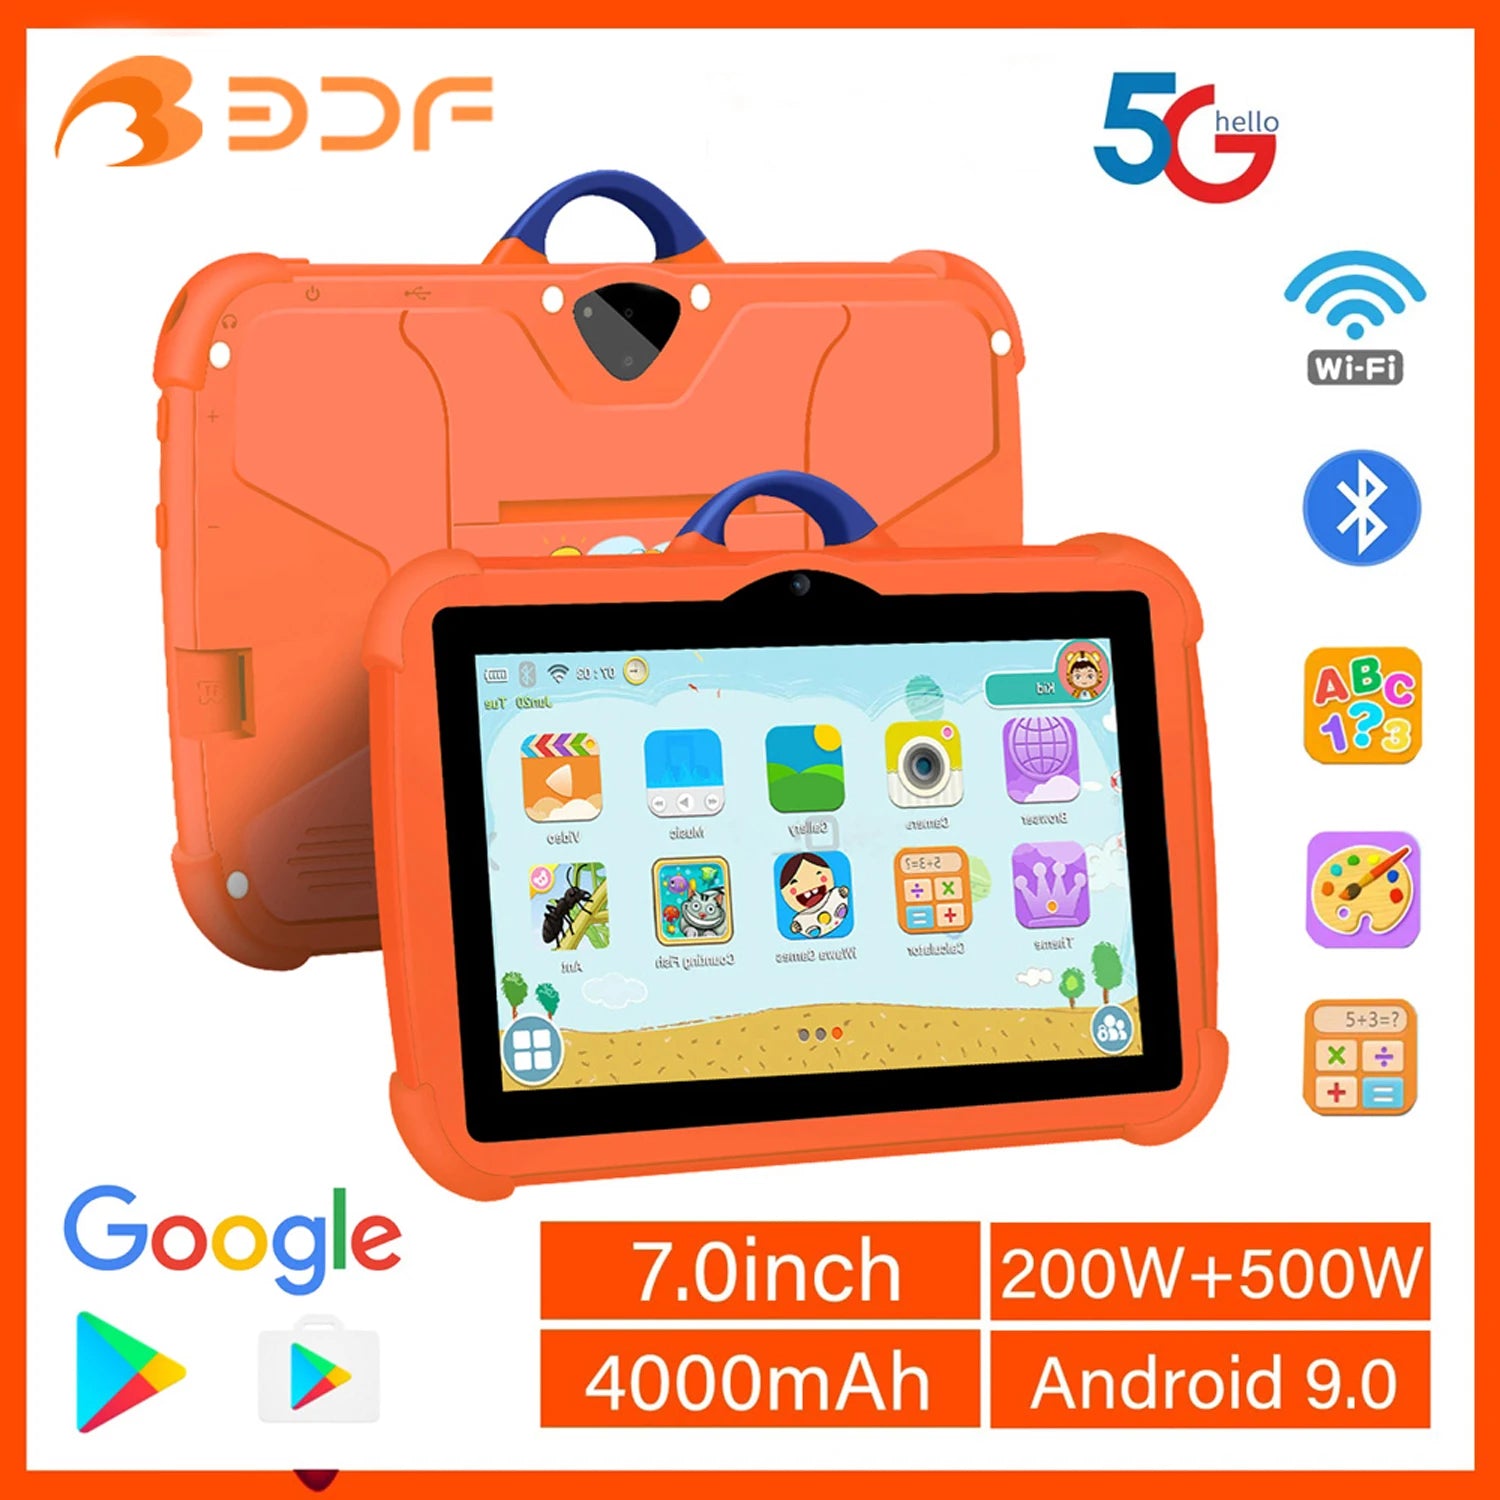 New 5G WiFi 7 Inch Google Tablet For Children Learning Education Kids Tablets Android9.0 Quad Core 4GB+64GB Dual Cameras 4000mAh